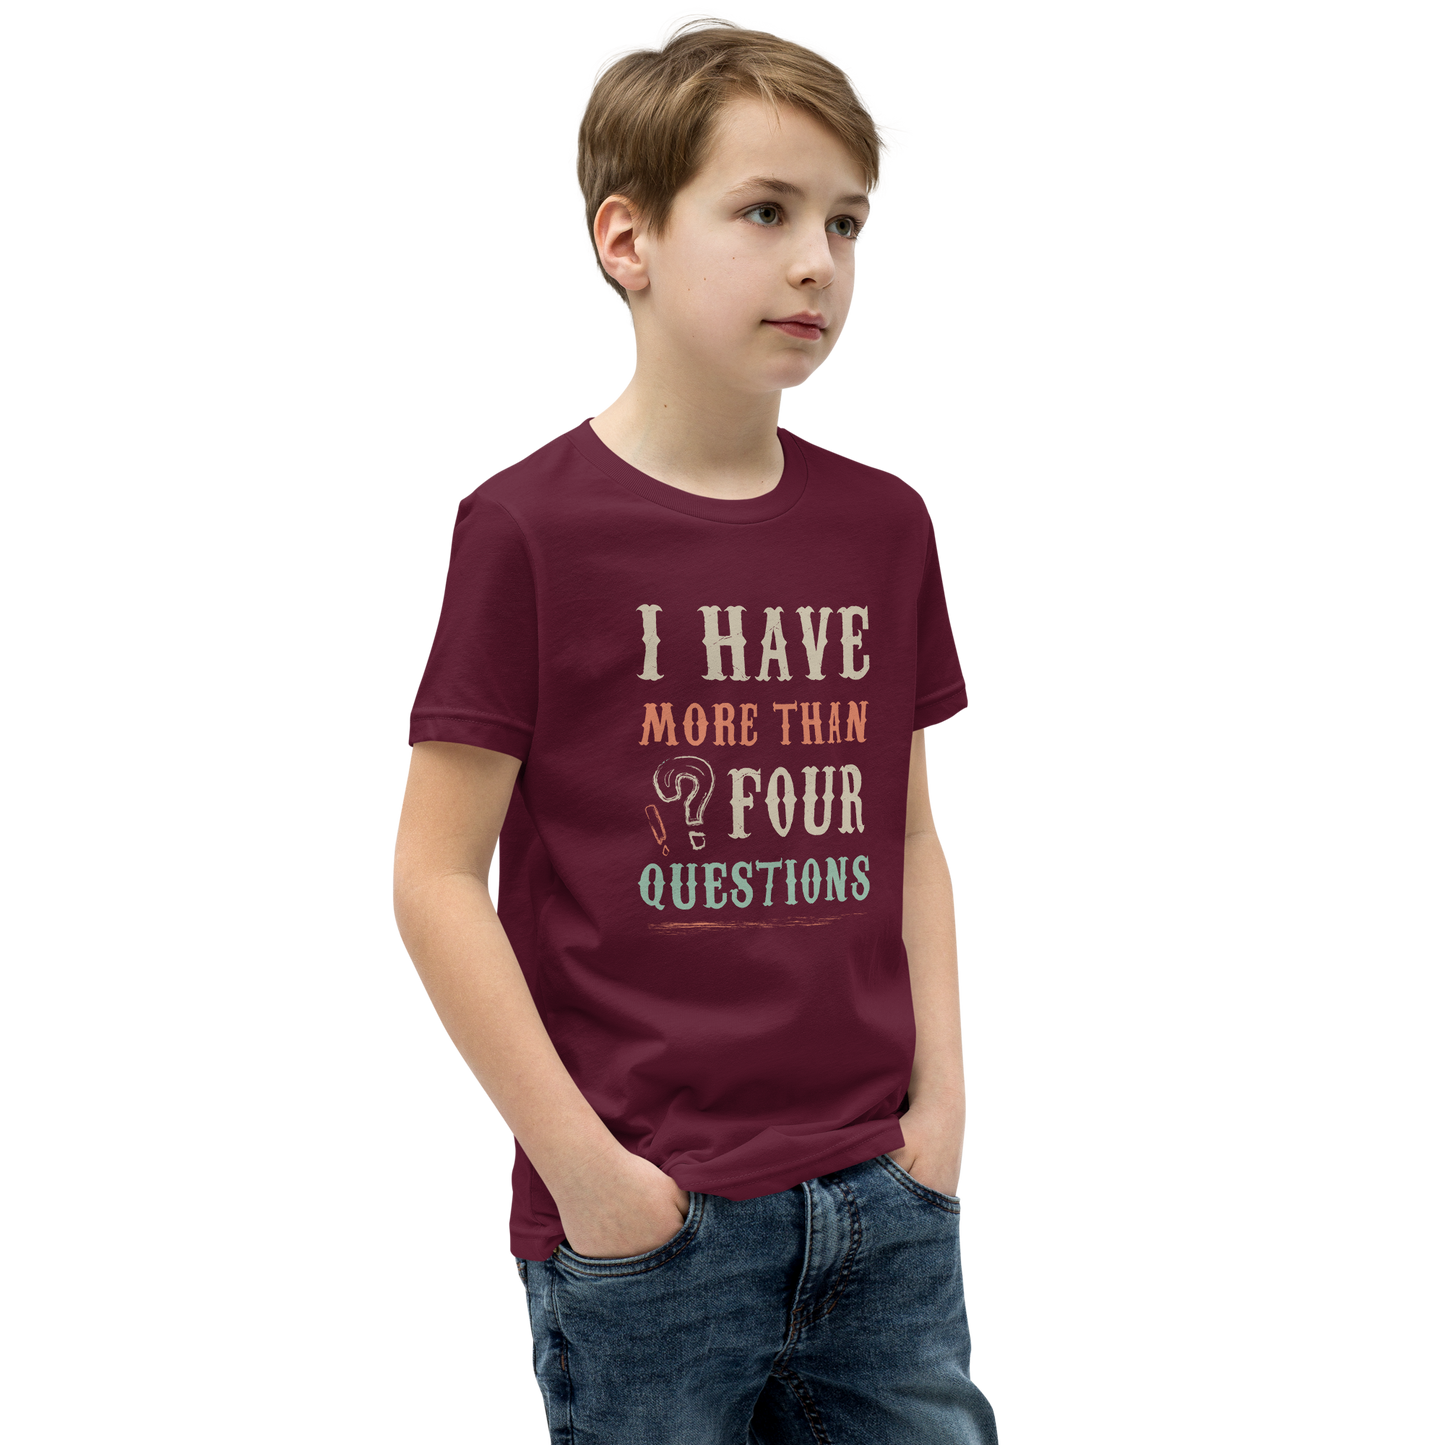 I Have More Than Four Questions" Kids Passover Shirt - A Seder Night Special!